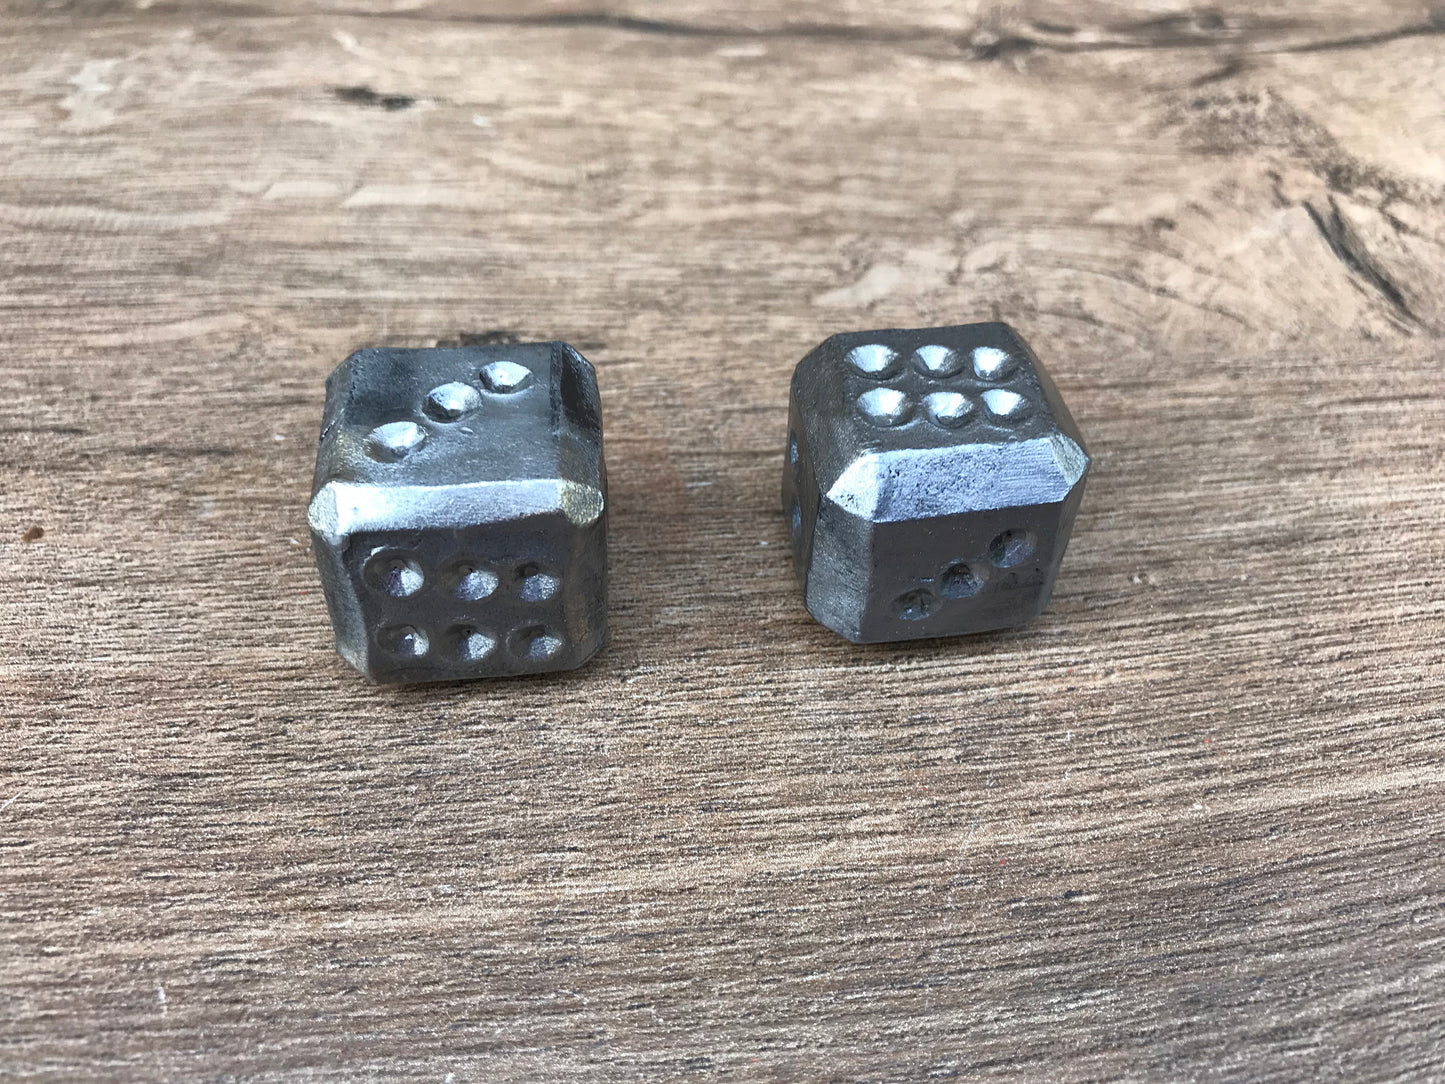 Iron dices, 6th anniversary, iron gift, iron anniversary, set of dices, custom dice, gambling dice, gaming dice, dice games, tabletop game